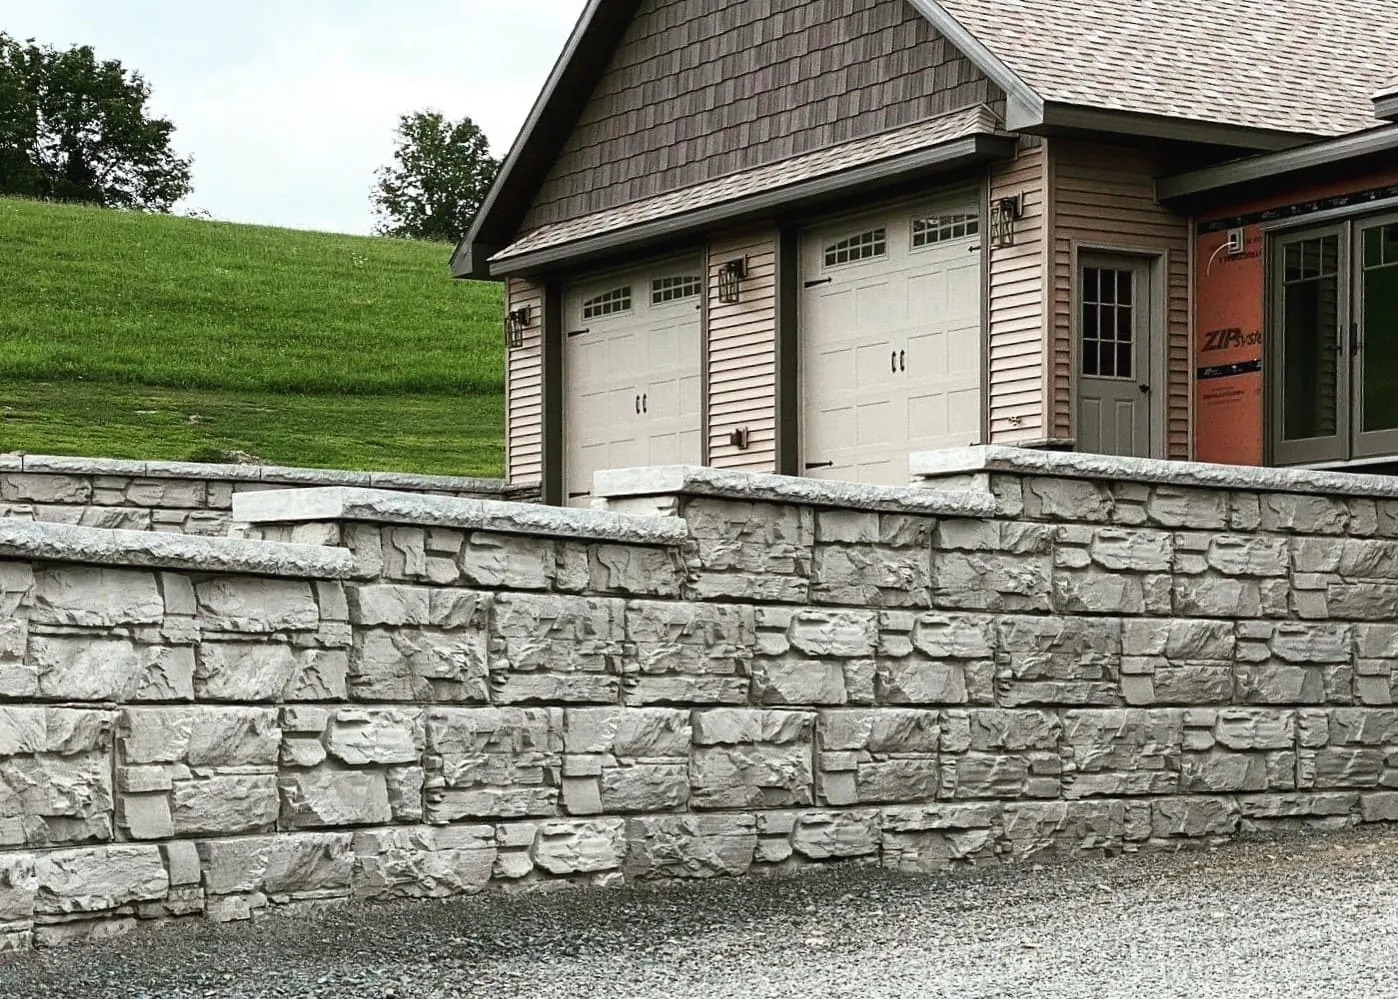 MagnumStone block top of retaining wall step-down details.